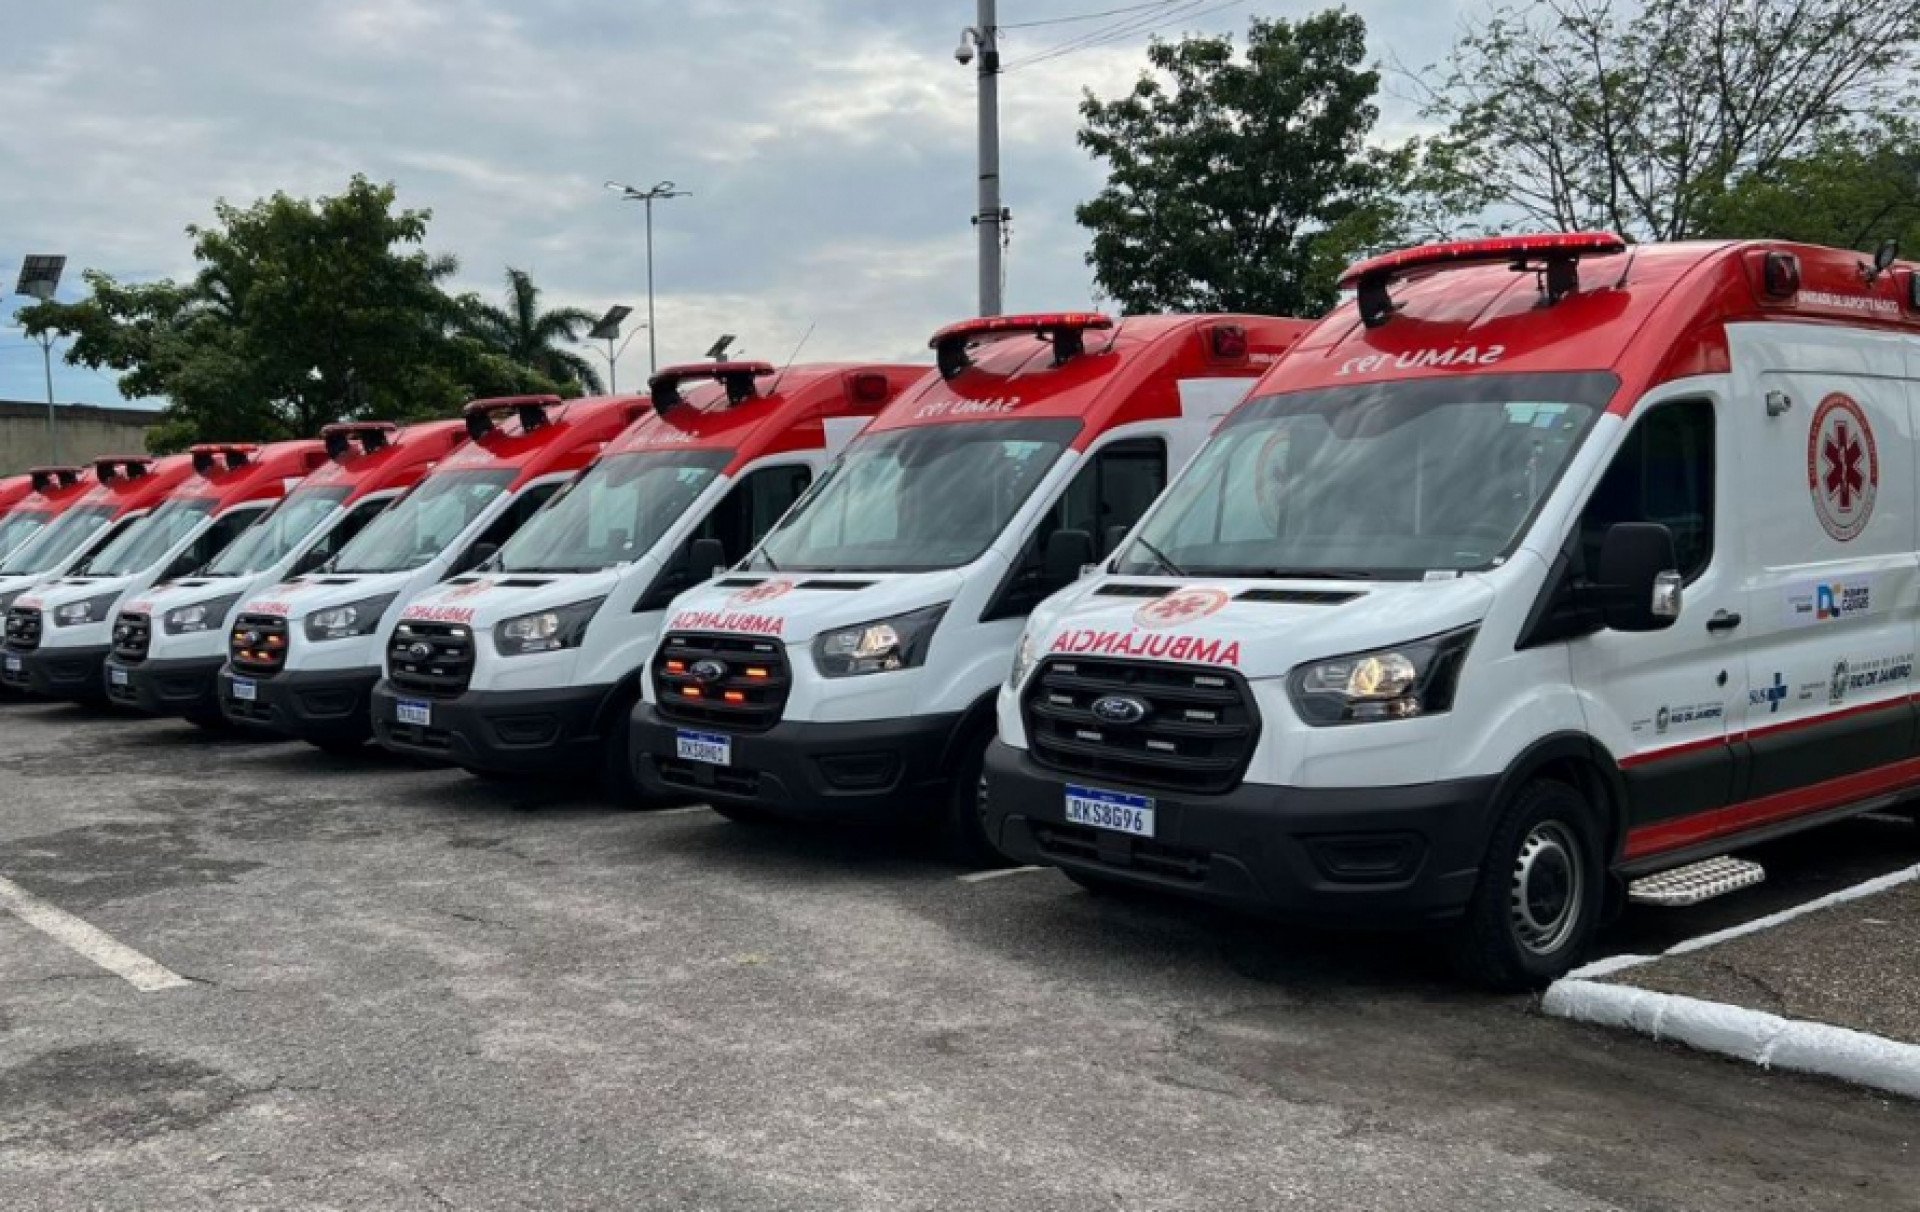 Rio De Janeiro, Brazil. 11th Jan, 2023. The governor of Rio Cláudio Castro,  launched this Wednesday morning (11), the SAMU 100% Mobile Emergency Care  project in the capital. The new vehicles will